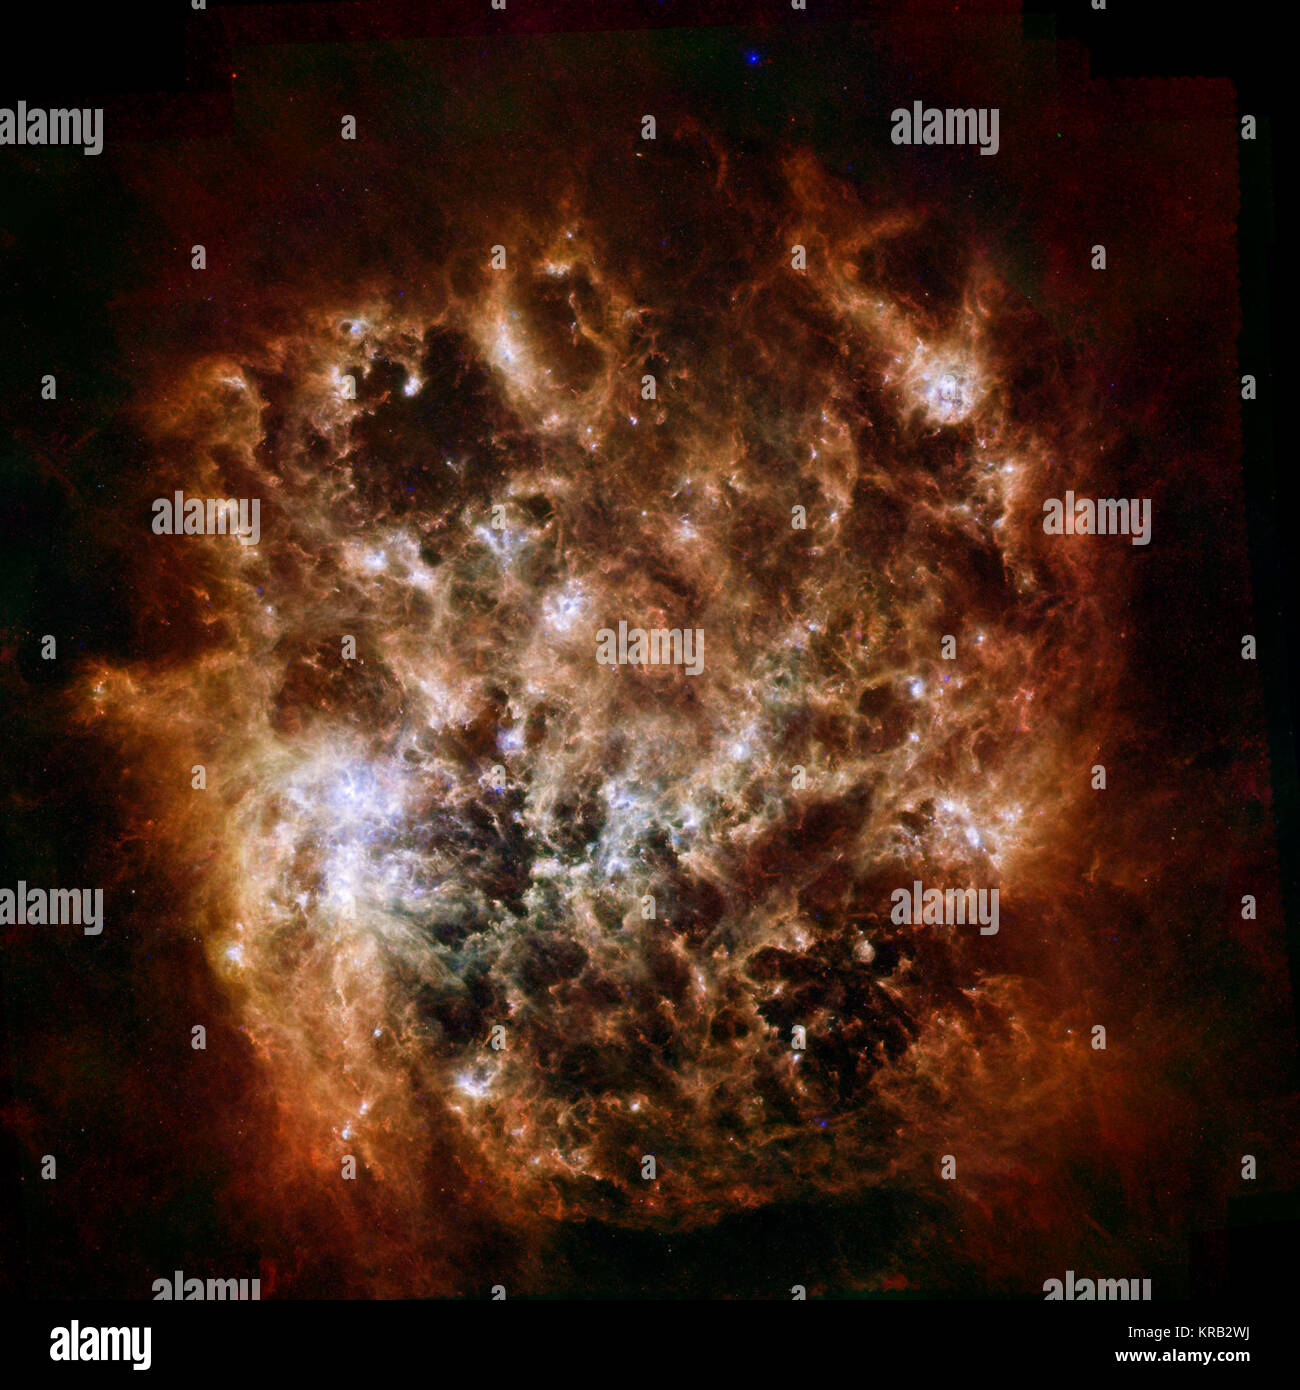 This new image shows the Large Magellanic Cloud galaxy in infrared light as seen by the Herschel Space Observatory, a European Space Agency-led mission with important NASA contributions, and NASA's Spitzer Space Telescope. In the instruments' combined data, this nearby dwarf galaxy looks like a fiery, circular explosion. Rather than fire, however, those ribbons are actually giant ripples of dust spanning tens or hundreds of light-years. Significant fields of star formation are noticeable in the center, just left of center and at right. The brightest center-left region is called 30 Doradus, or  Stock Photo